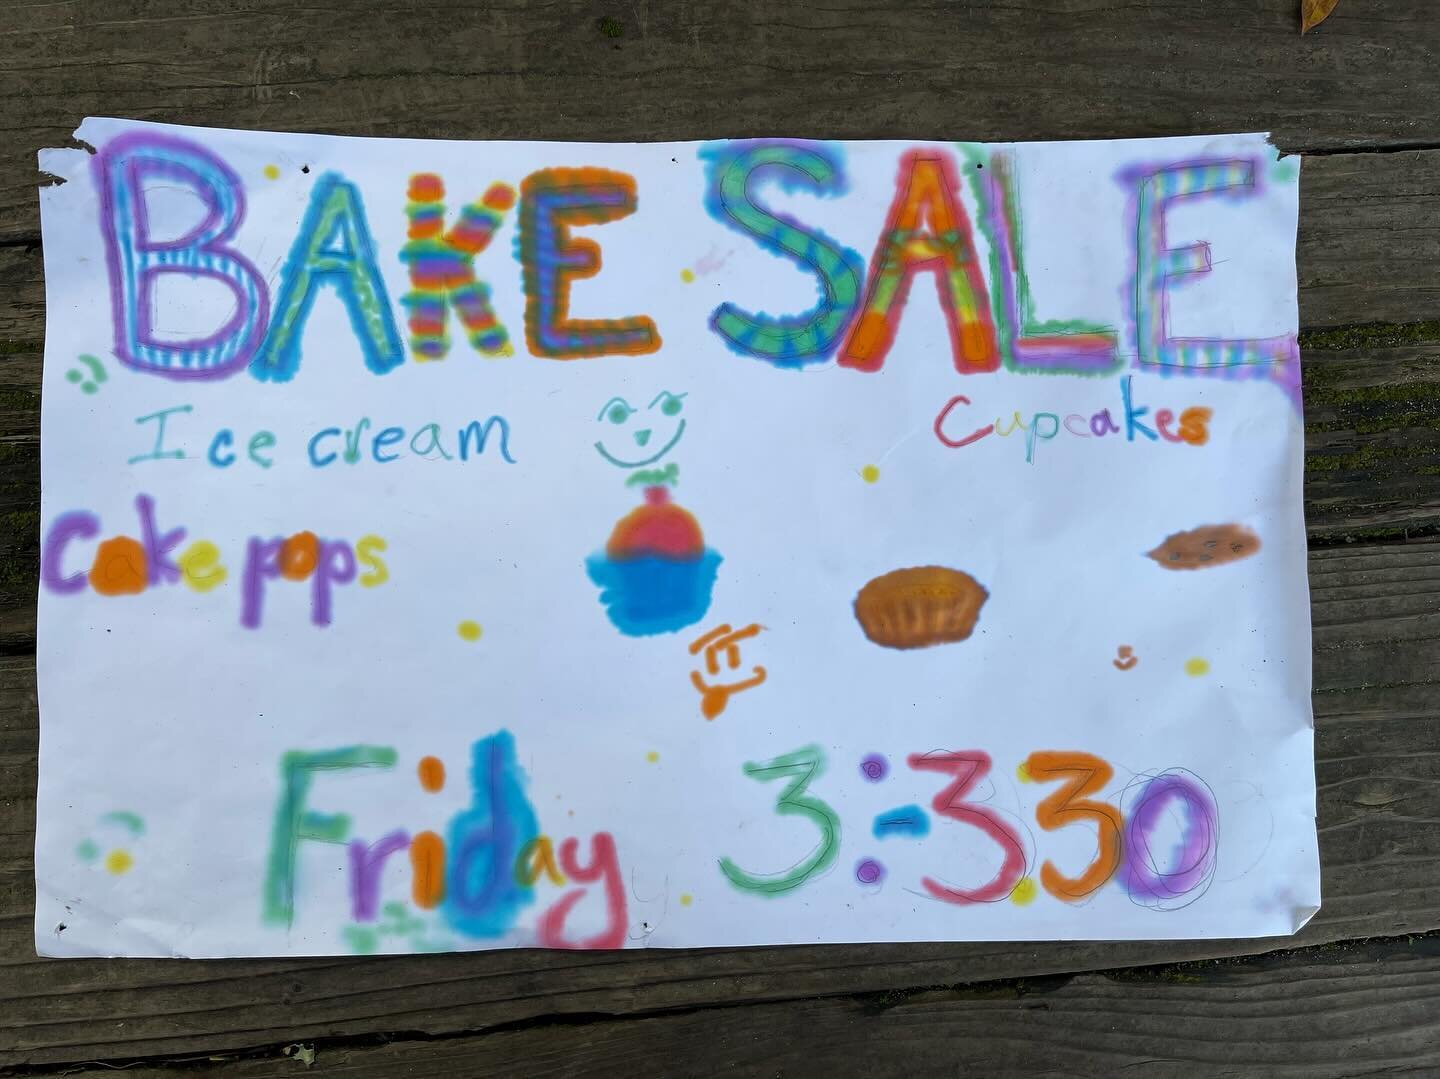 BAKE SALE was a wonderful success! Thank you to everyone who contributed and participated in helping the 5/6th graders raise money for their backpacking trip!!!!